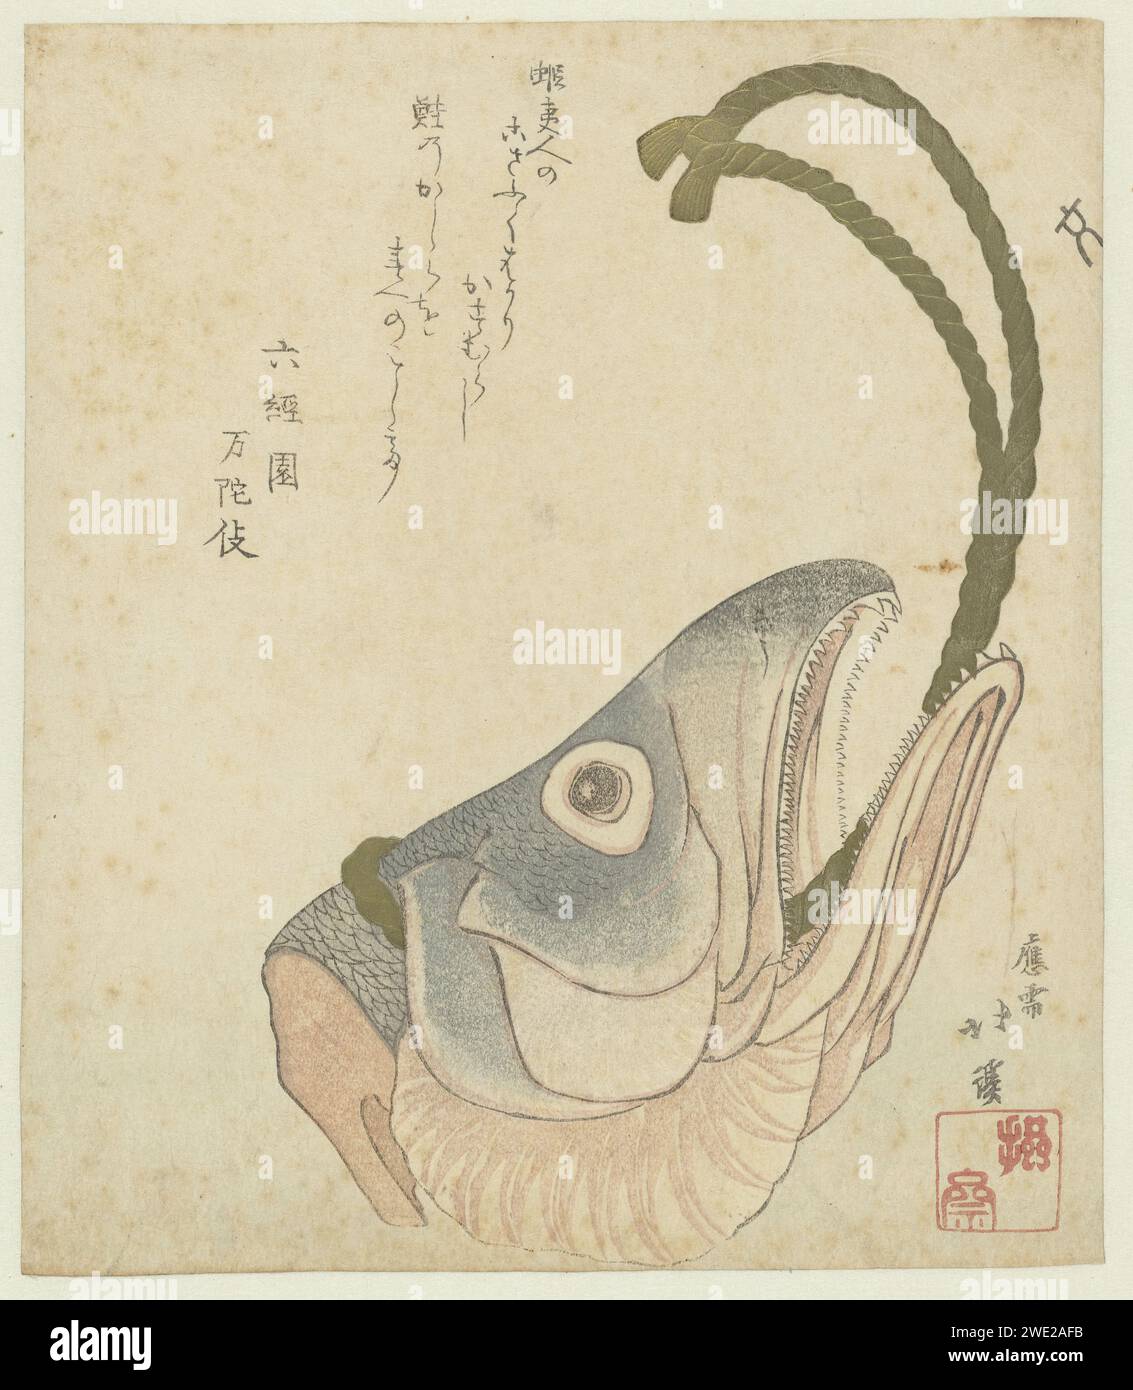 Head of a Salmon, Totoya Hokkei, c. 1815 - c. 1820 print The head of a salmon where a gold -colored rope is recommended. This was hung in homes for protection against evil. With one poem. Japan paper color woodcut bony fishes: salmon Stock Photo